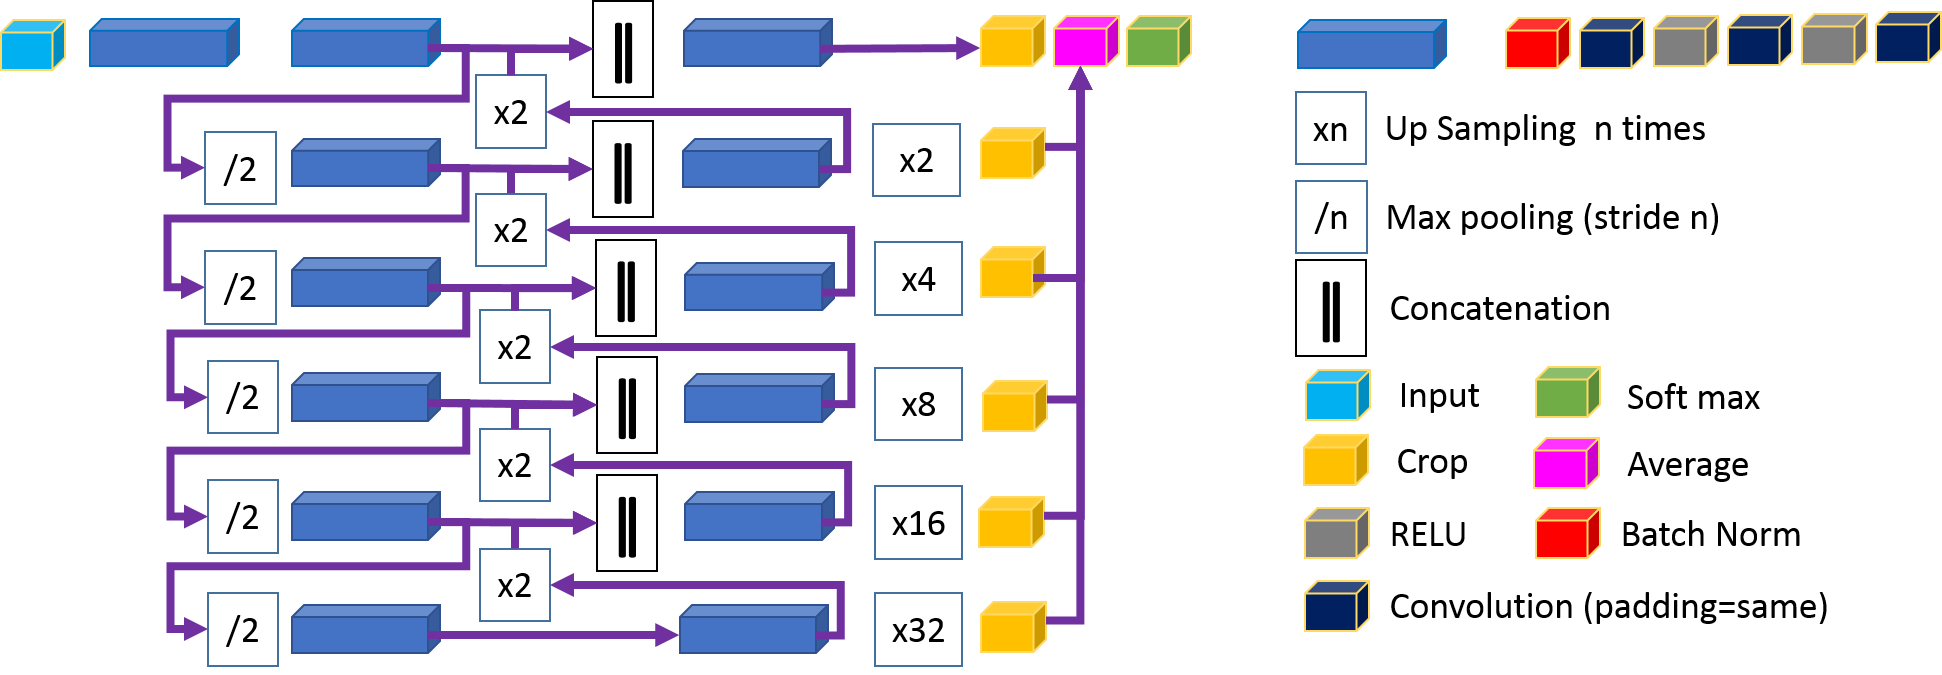 KID-Net architecture. The two contradicting phases are colored in blue. The down-sampling and up-sampling phases detect and localize features respectively. The segmentation result, at different scale levels, are averaged to compute the final segmentation.